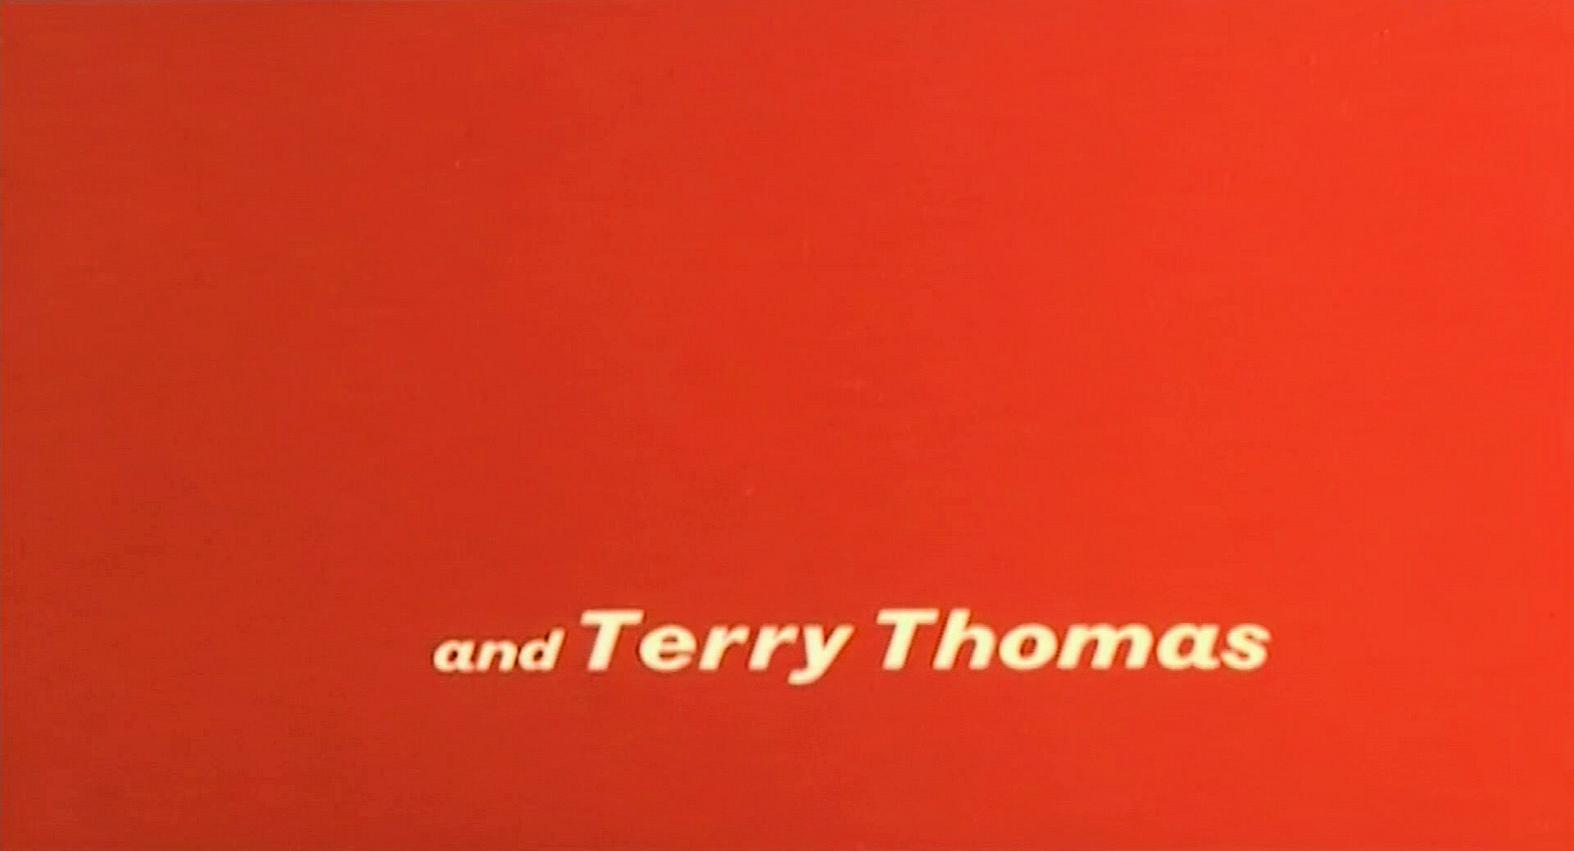 Main title from The Mouse on the Moon (1963) (5). And Terry Thomas